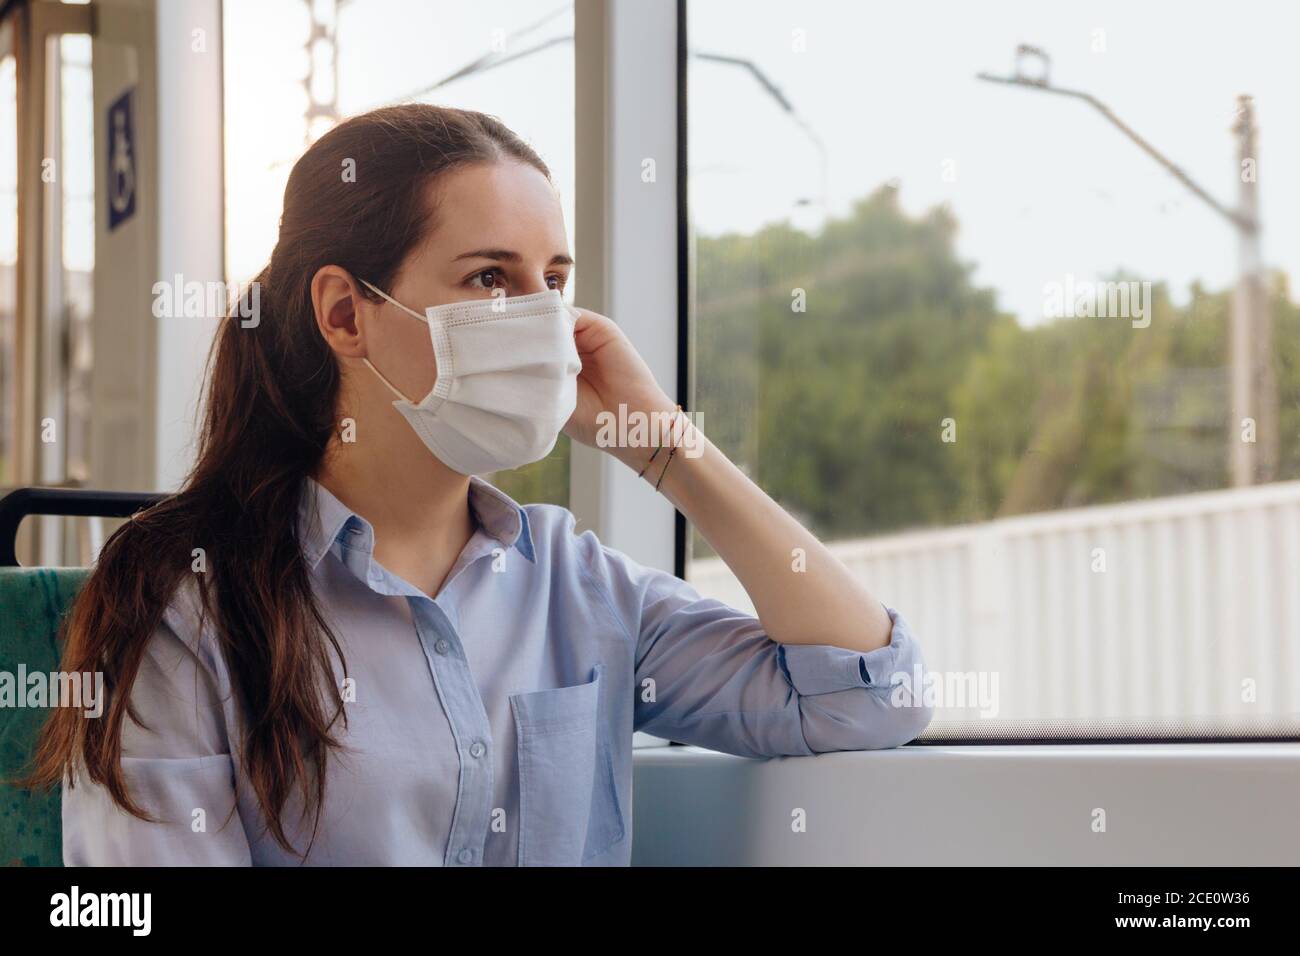 Stock photo of a young woman wearing a face mask traveling by tram. She is looking out the window. New normal concept Stock Photo